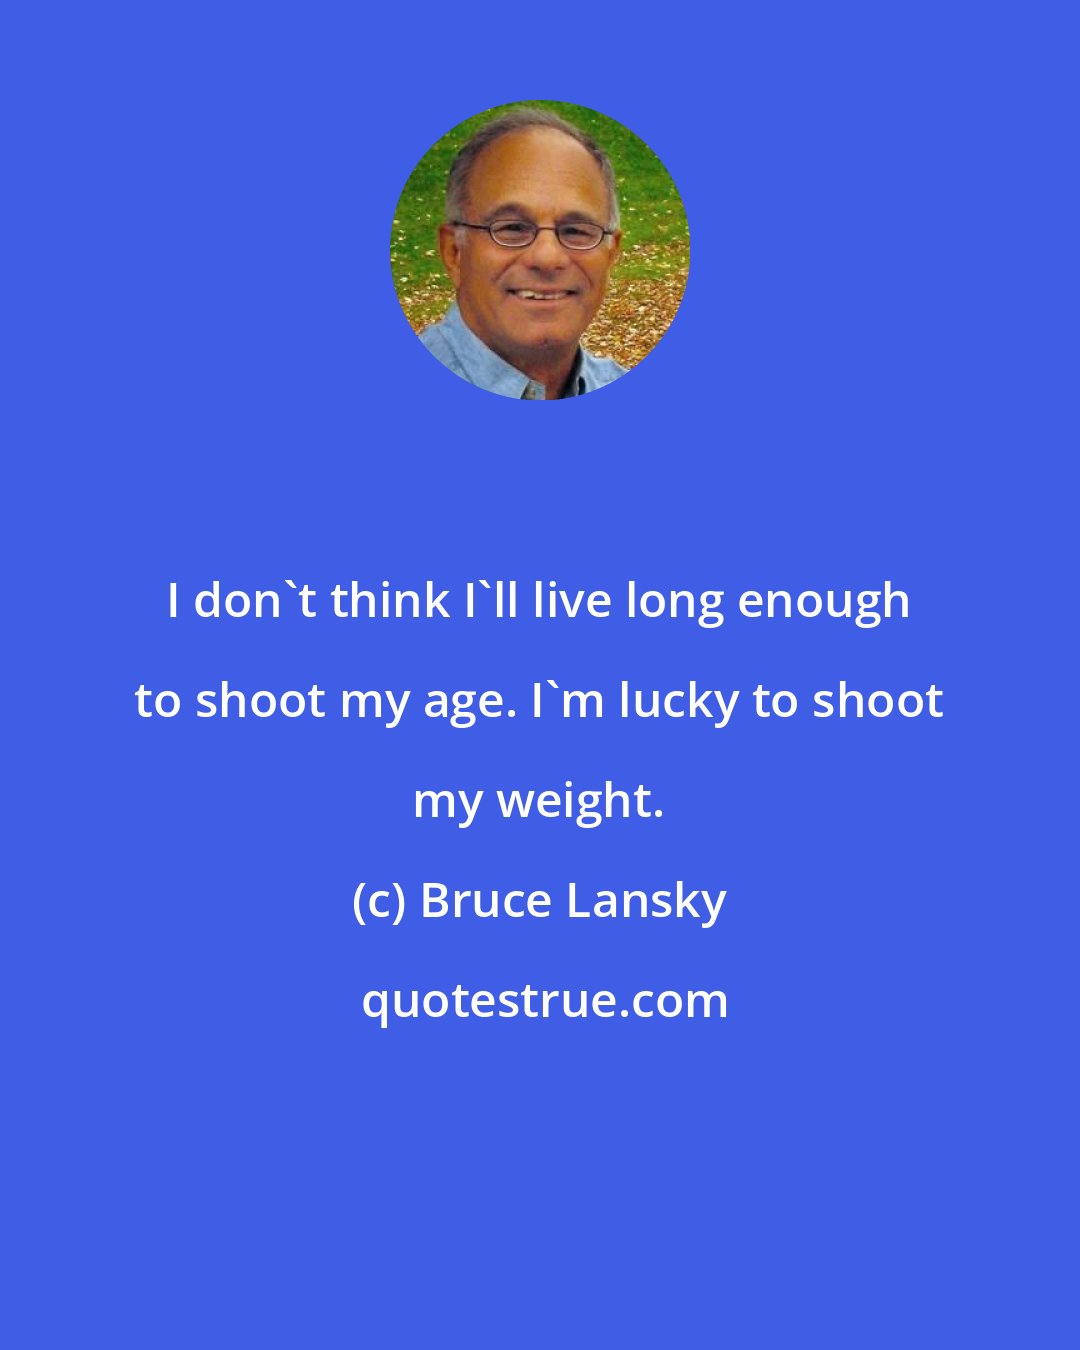 Bruce Lansky: I don't think I'll live long enough to shoot my age. I'm lucky to shoot my weight.